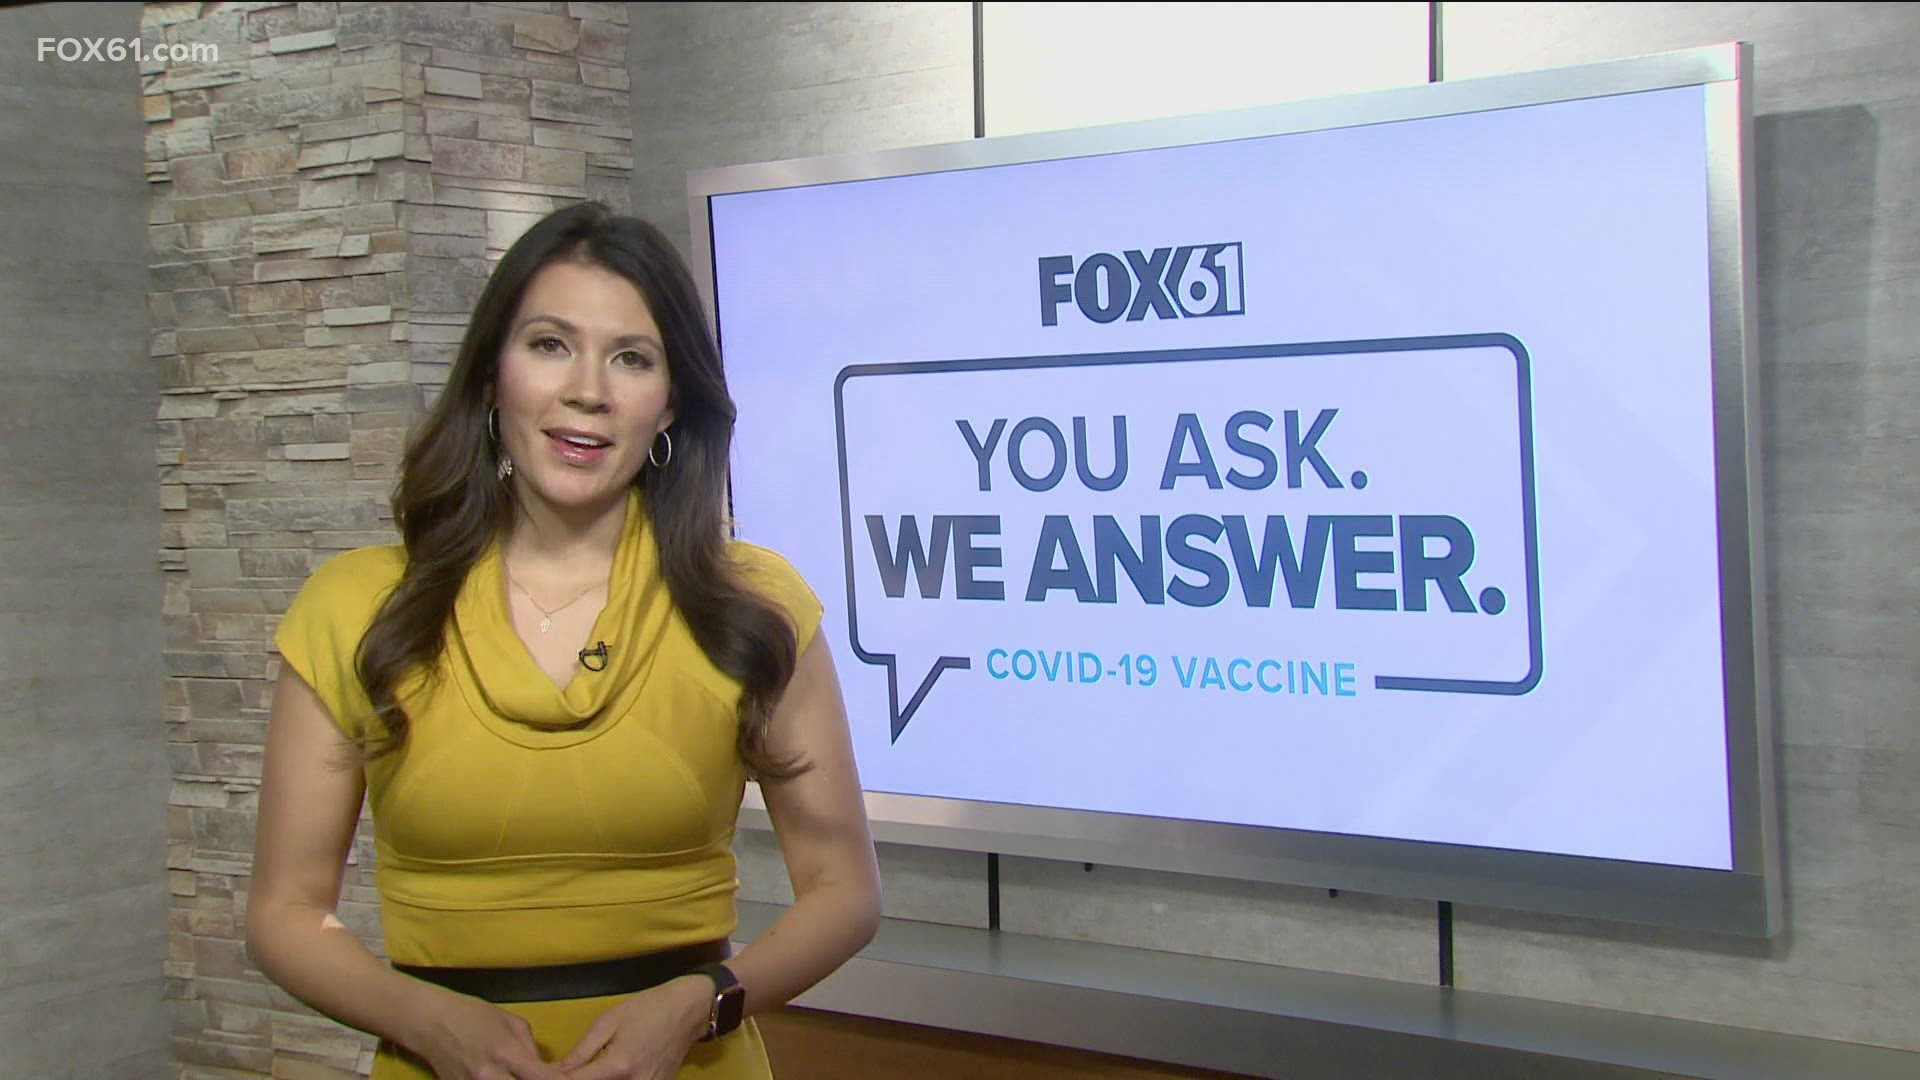 More people are eligible for the Coved 19 vaccination, and there are more questions from viewers.